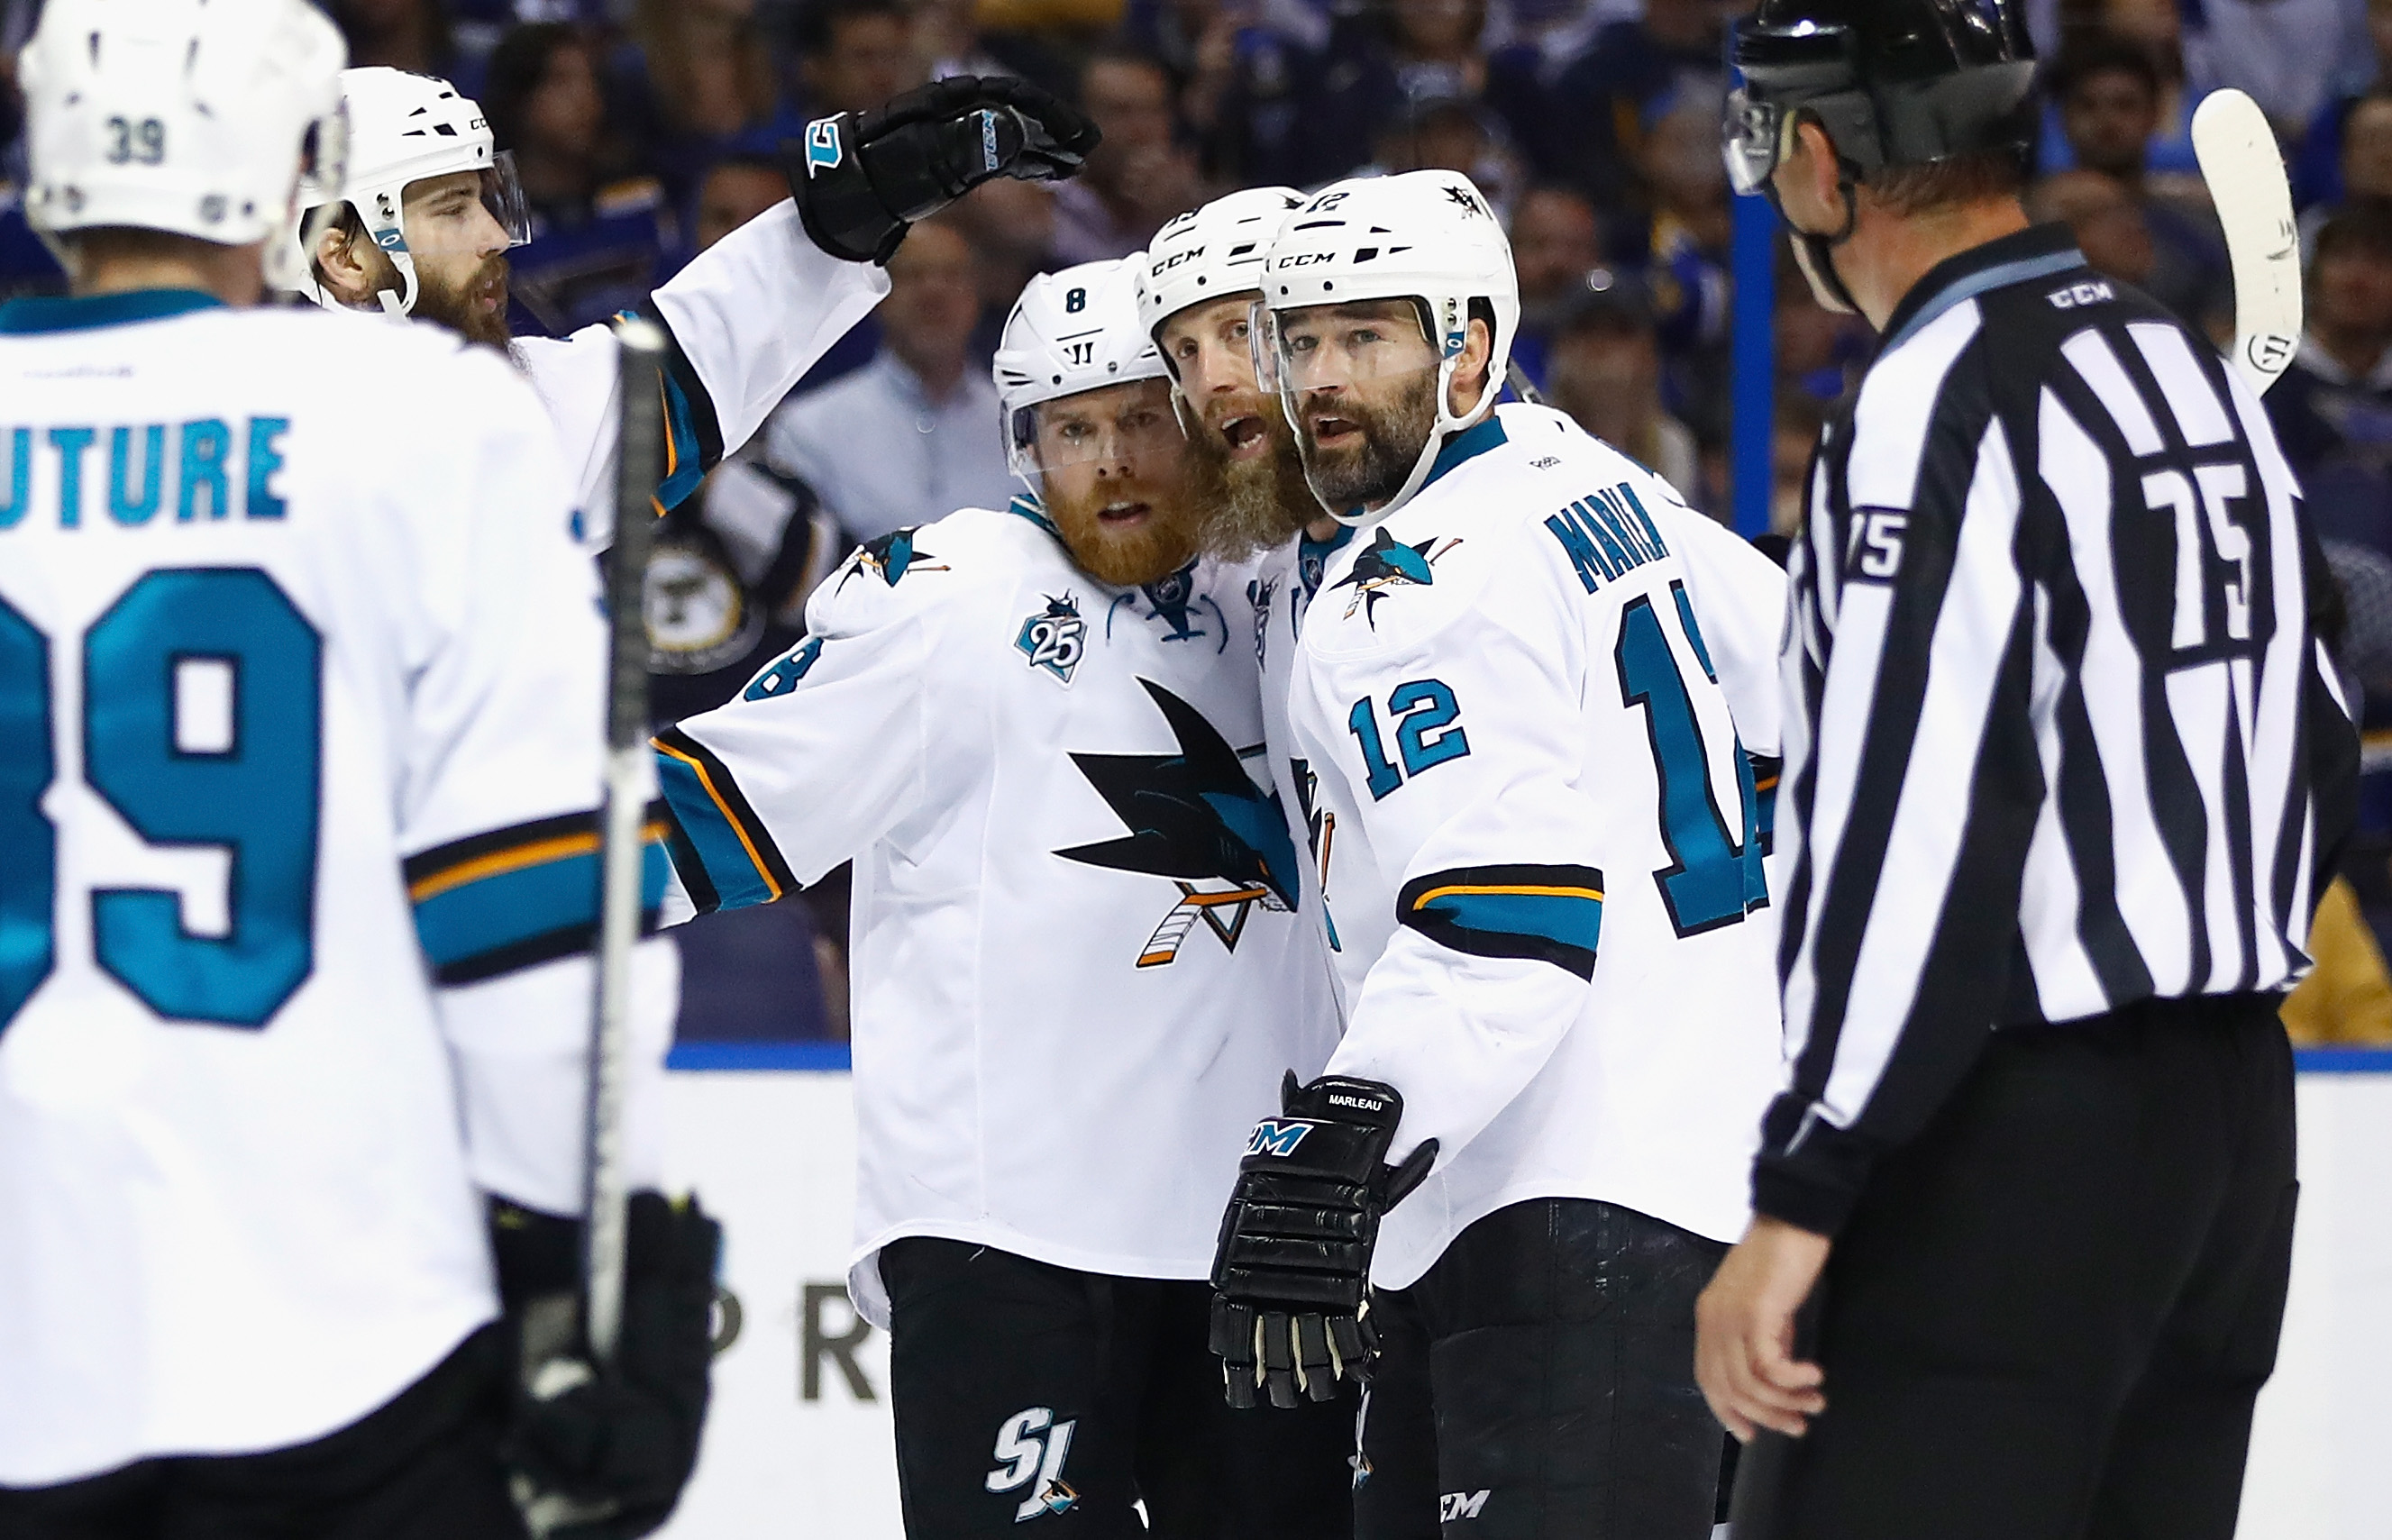 ST LOUIS, MO - MAY 23: Joe Pavelski #8 of the San Jose Sharks celebrates with Joe Thornton #19, Patrick Marleau #12 and Brent Burns #88 after scoring a second period goal against the St. Louis Blues in Game Five of the Western Conference Final during the 2016 NHL Stanley Cup Playoffs at Scottrade Center on May 23, 2016 in St Louis, Missouri.